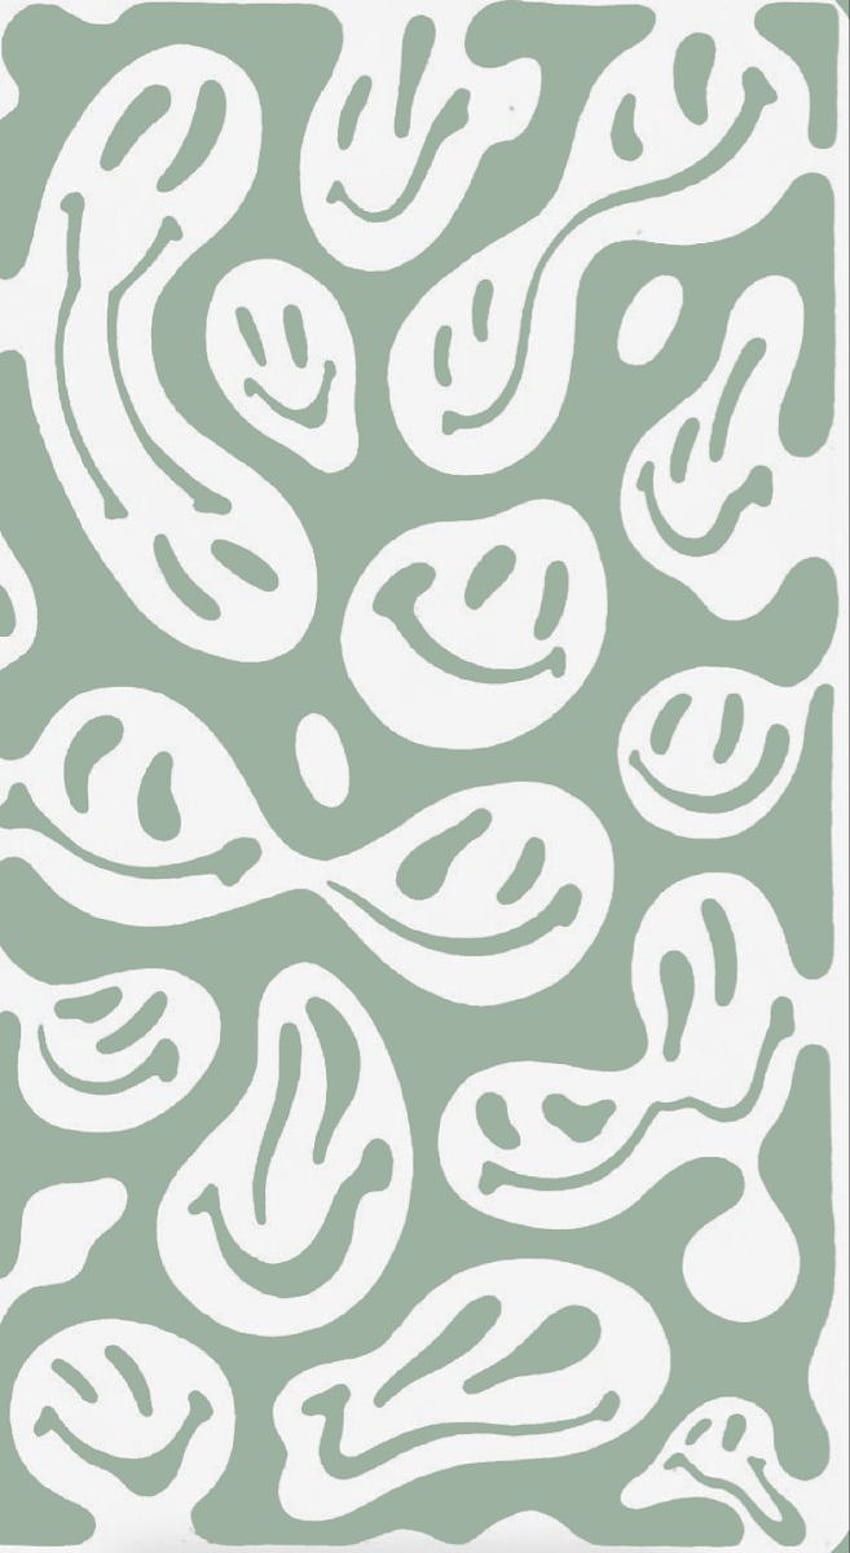 A green and white patterned paper with a squiggle design - Smiley